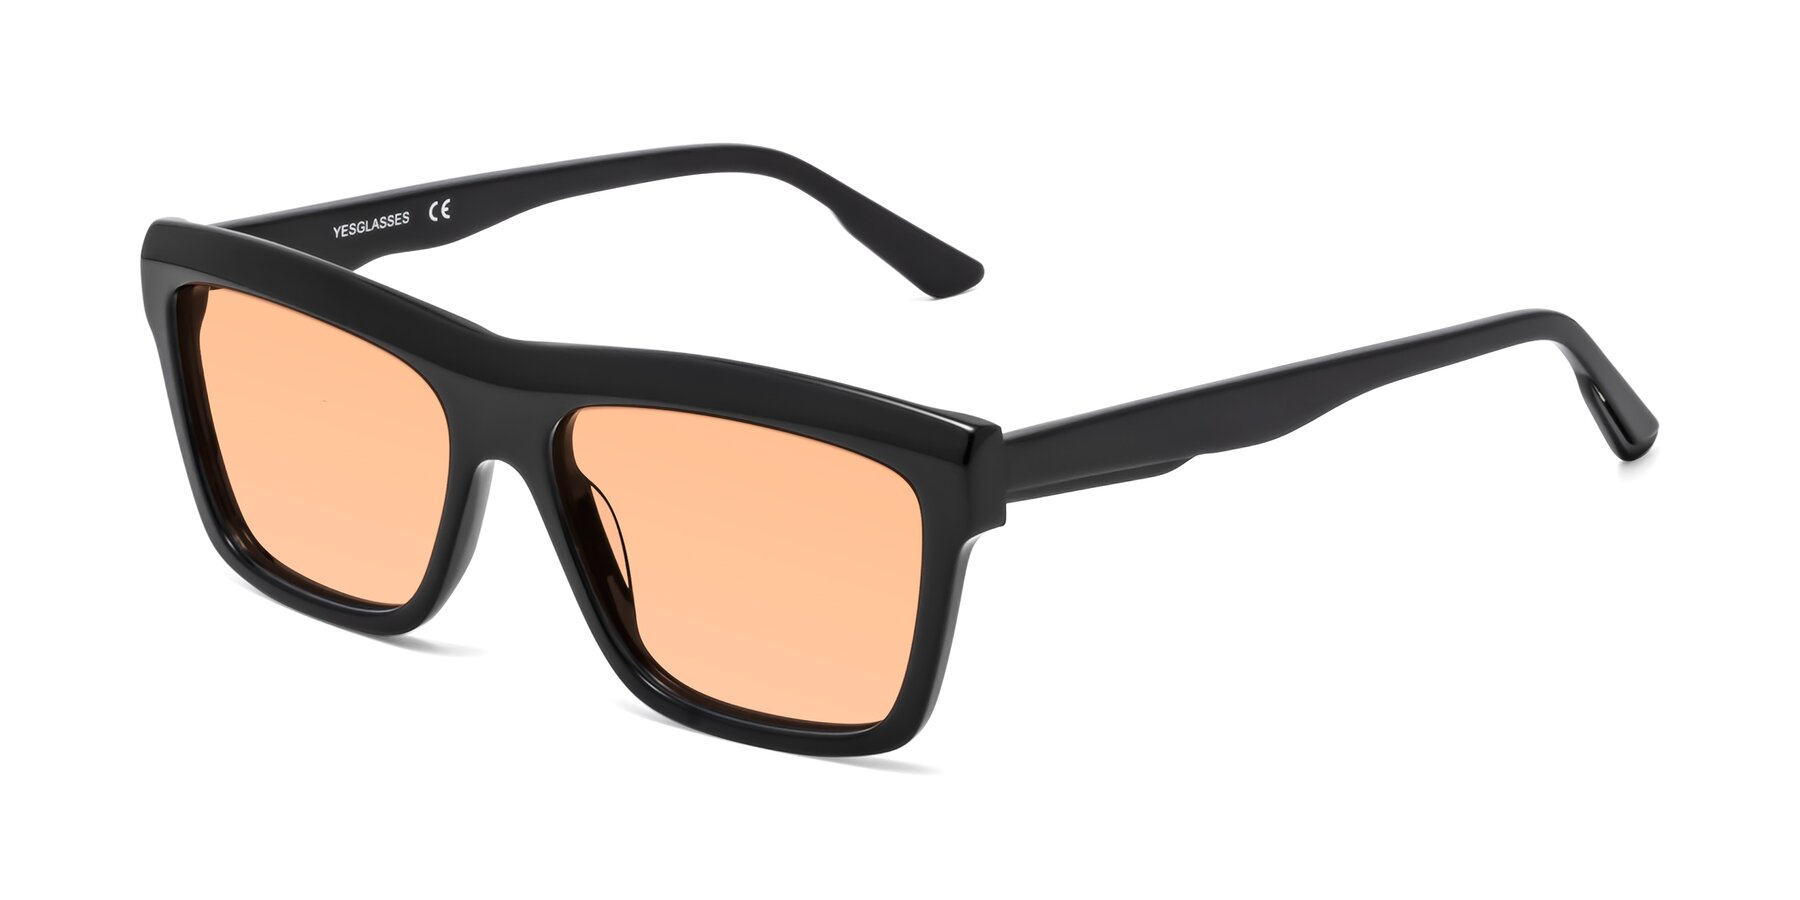 Angle of 1481 in Black with Light Orange Tinted Lenses